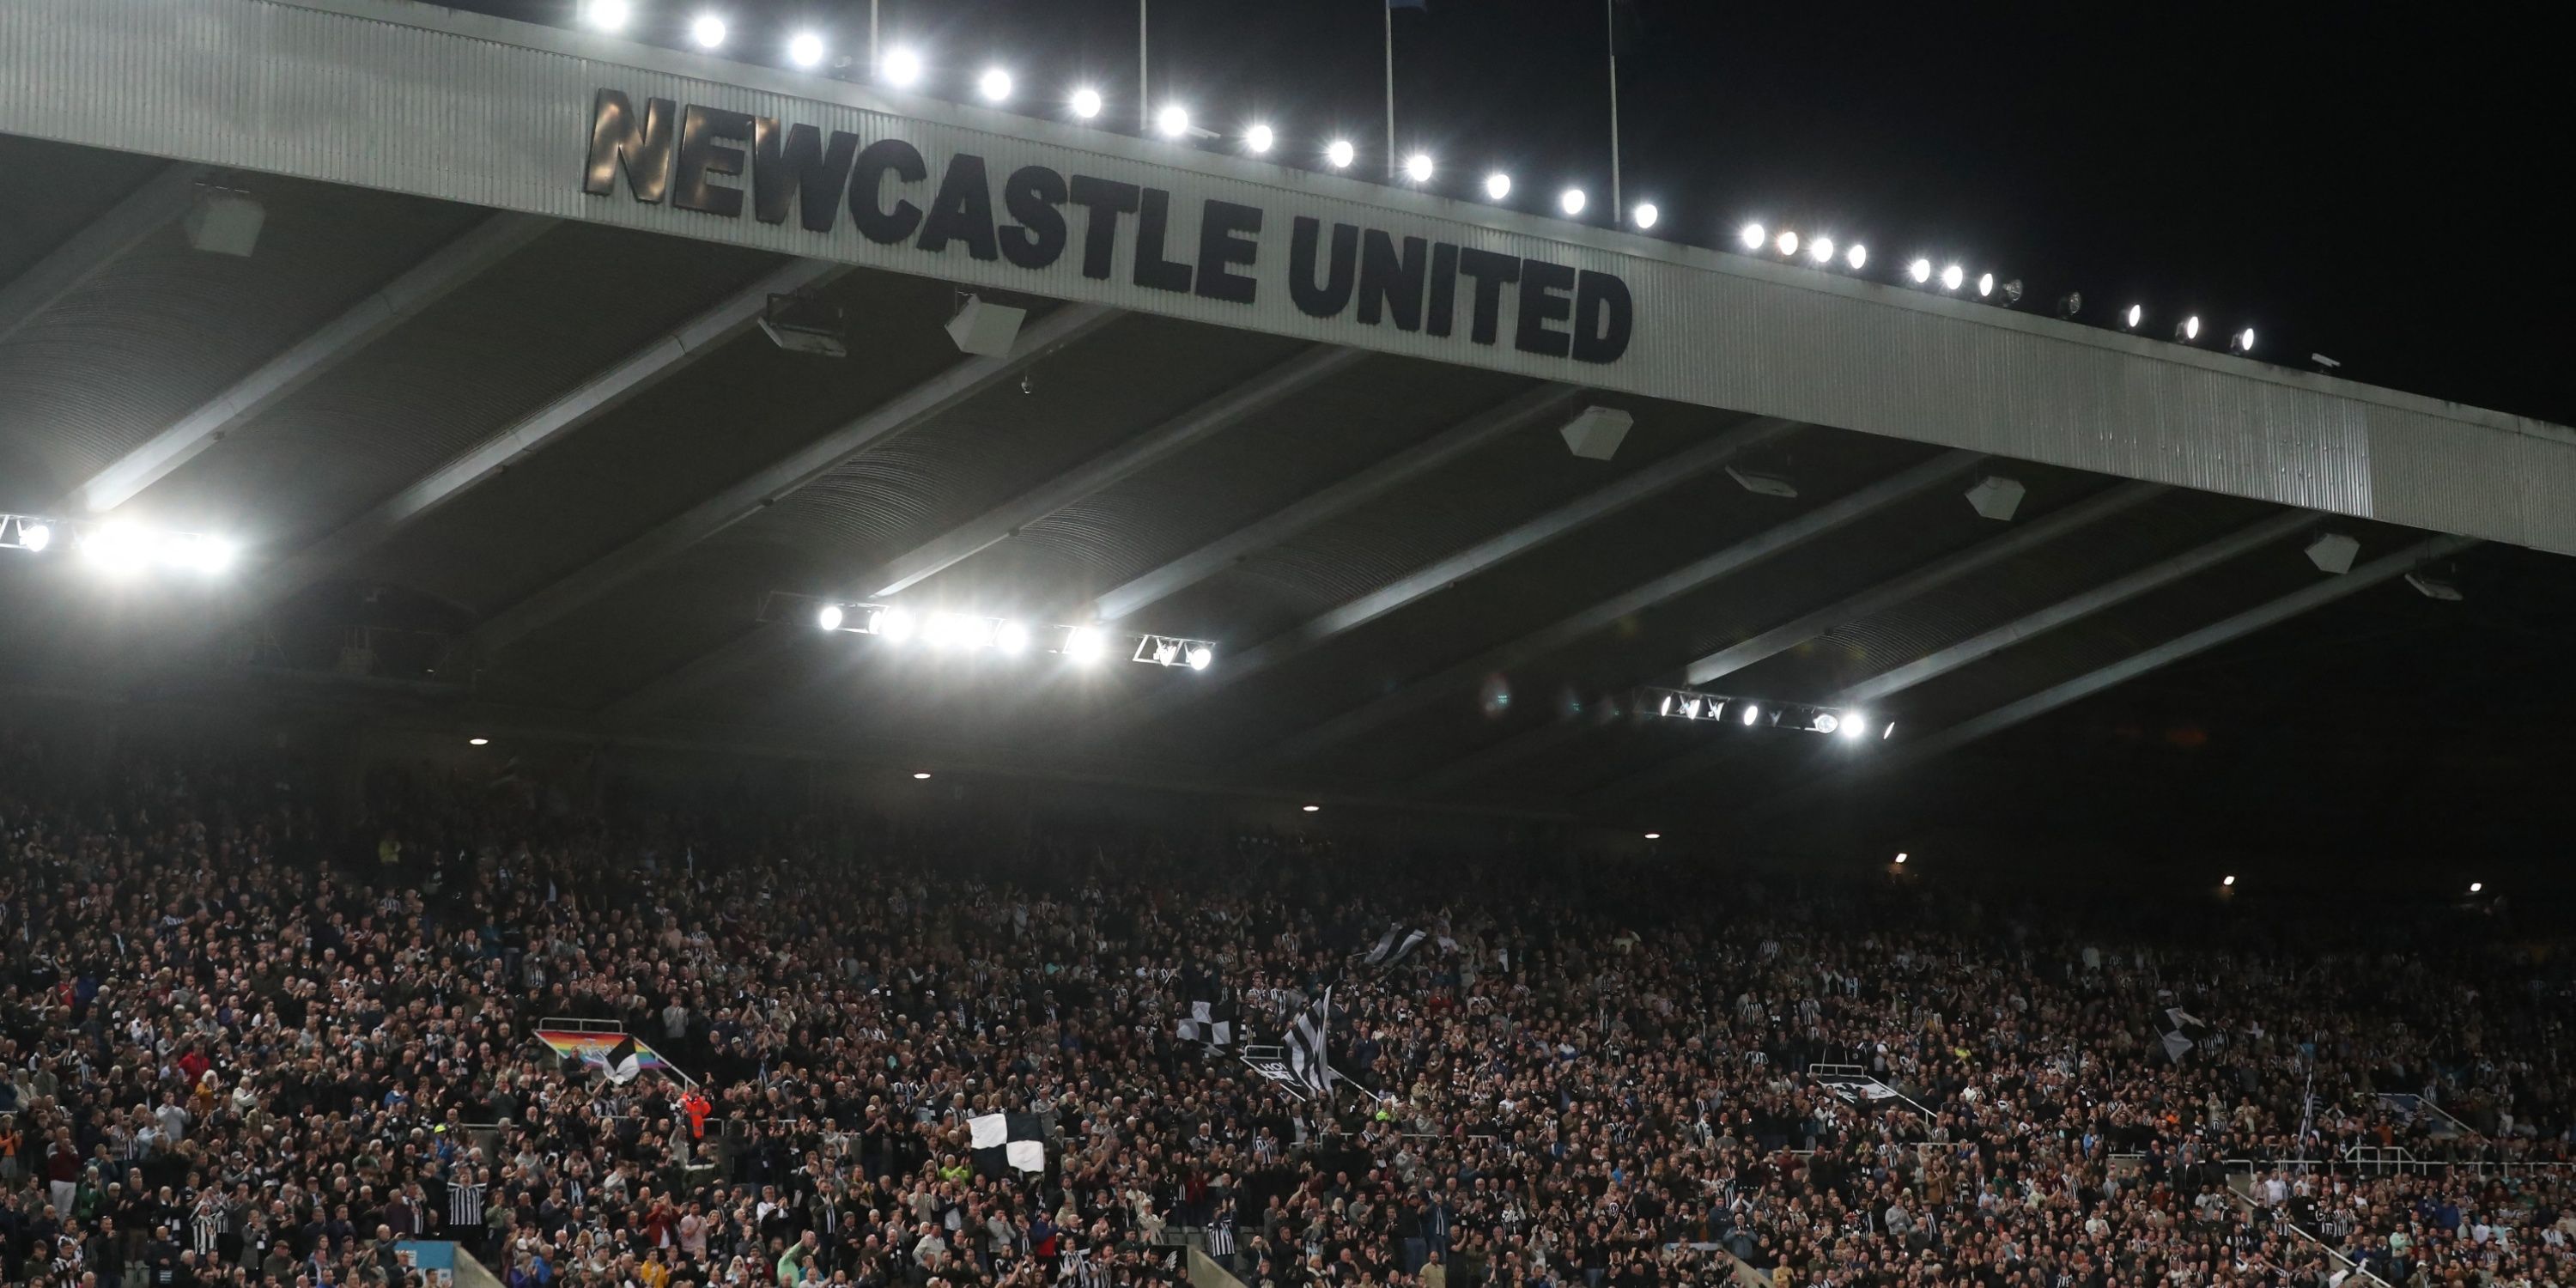 newcastle expected to make official bid for south american talent - report